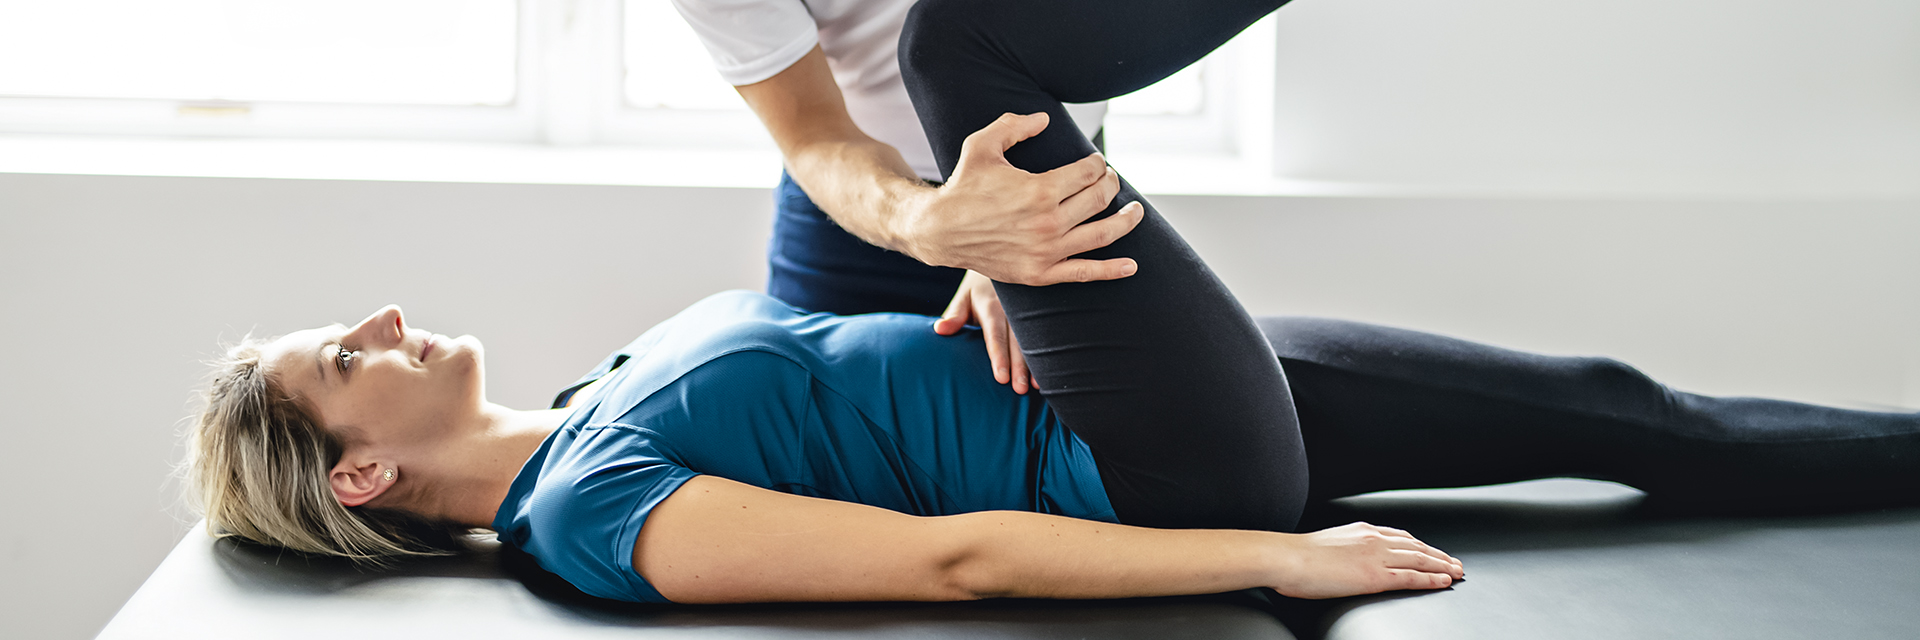 Pelvic Floor Physical Therapy PFD Treatment Ivy Rehab